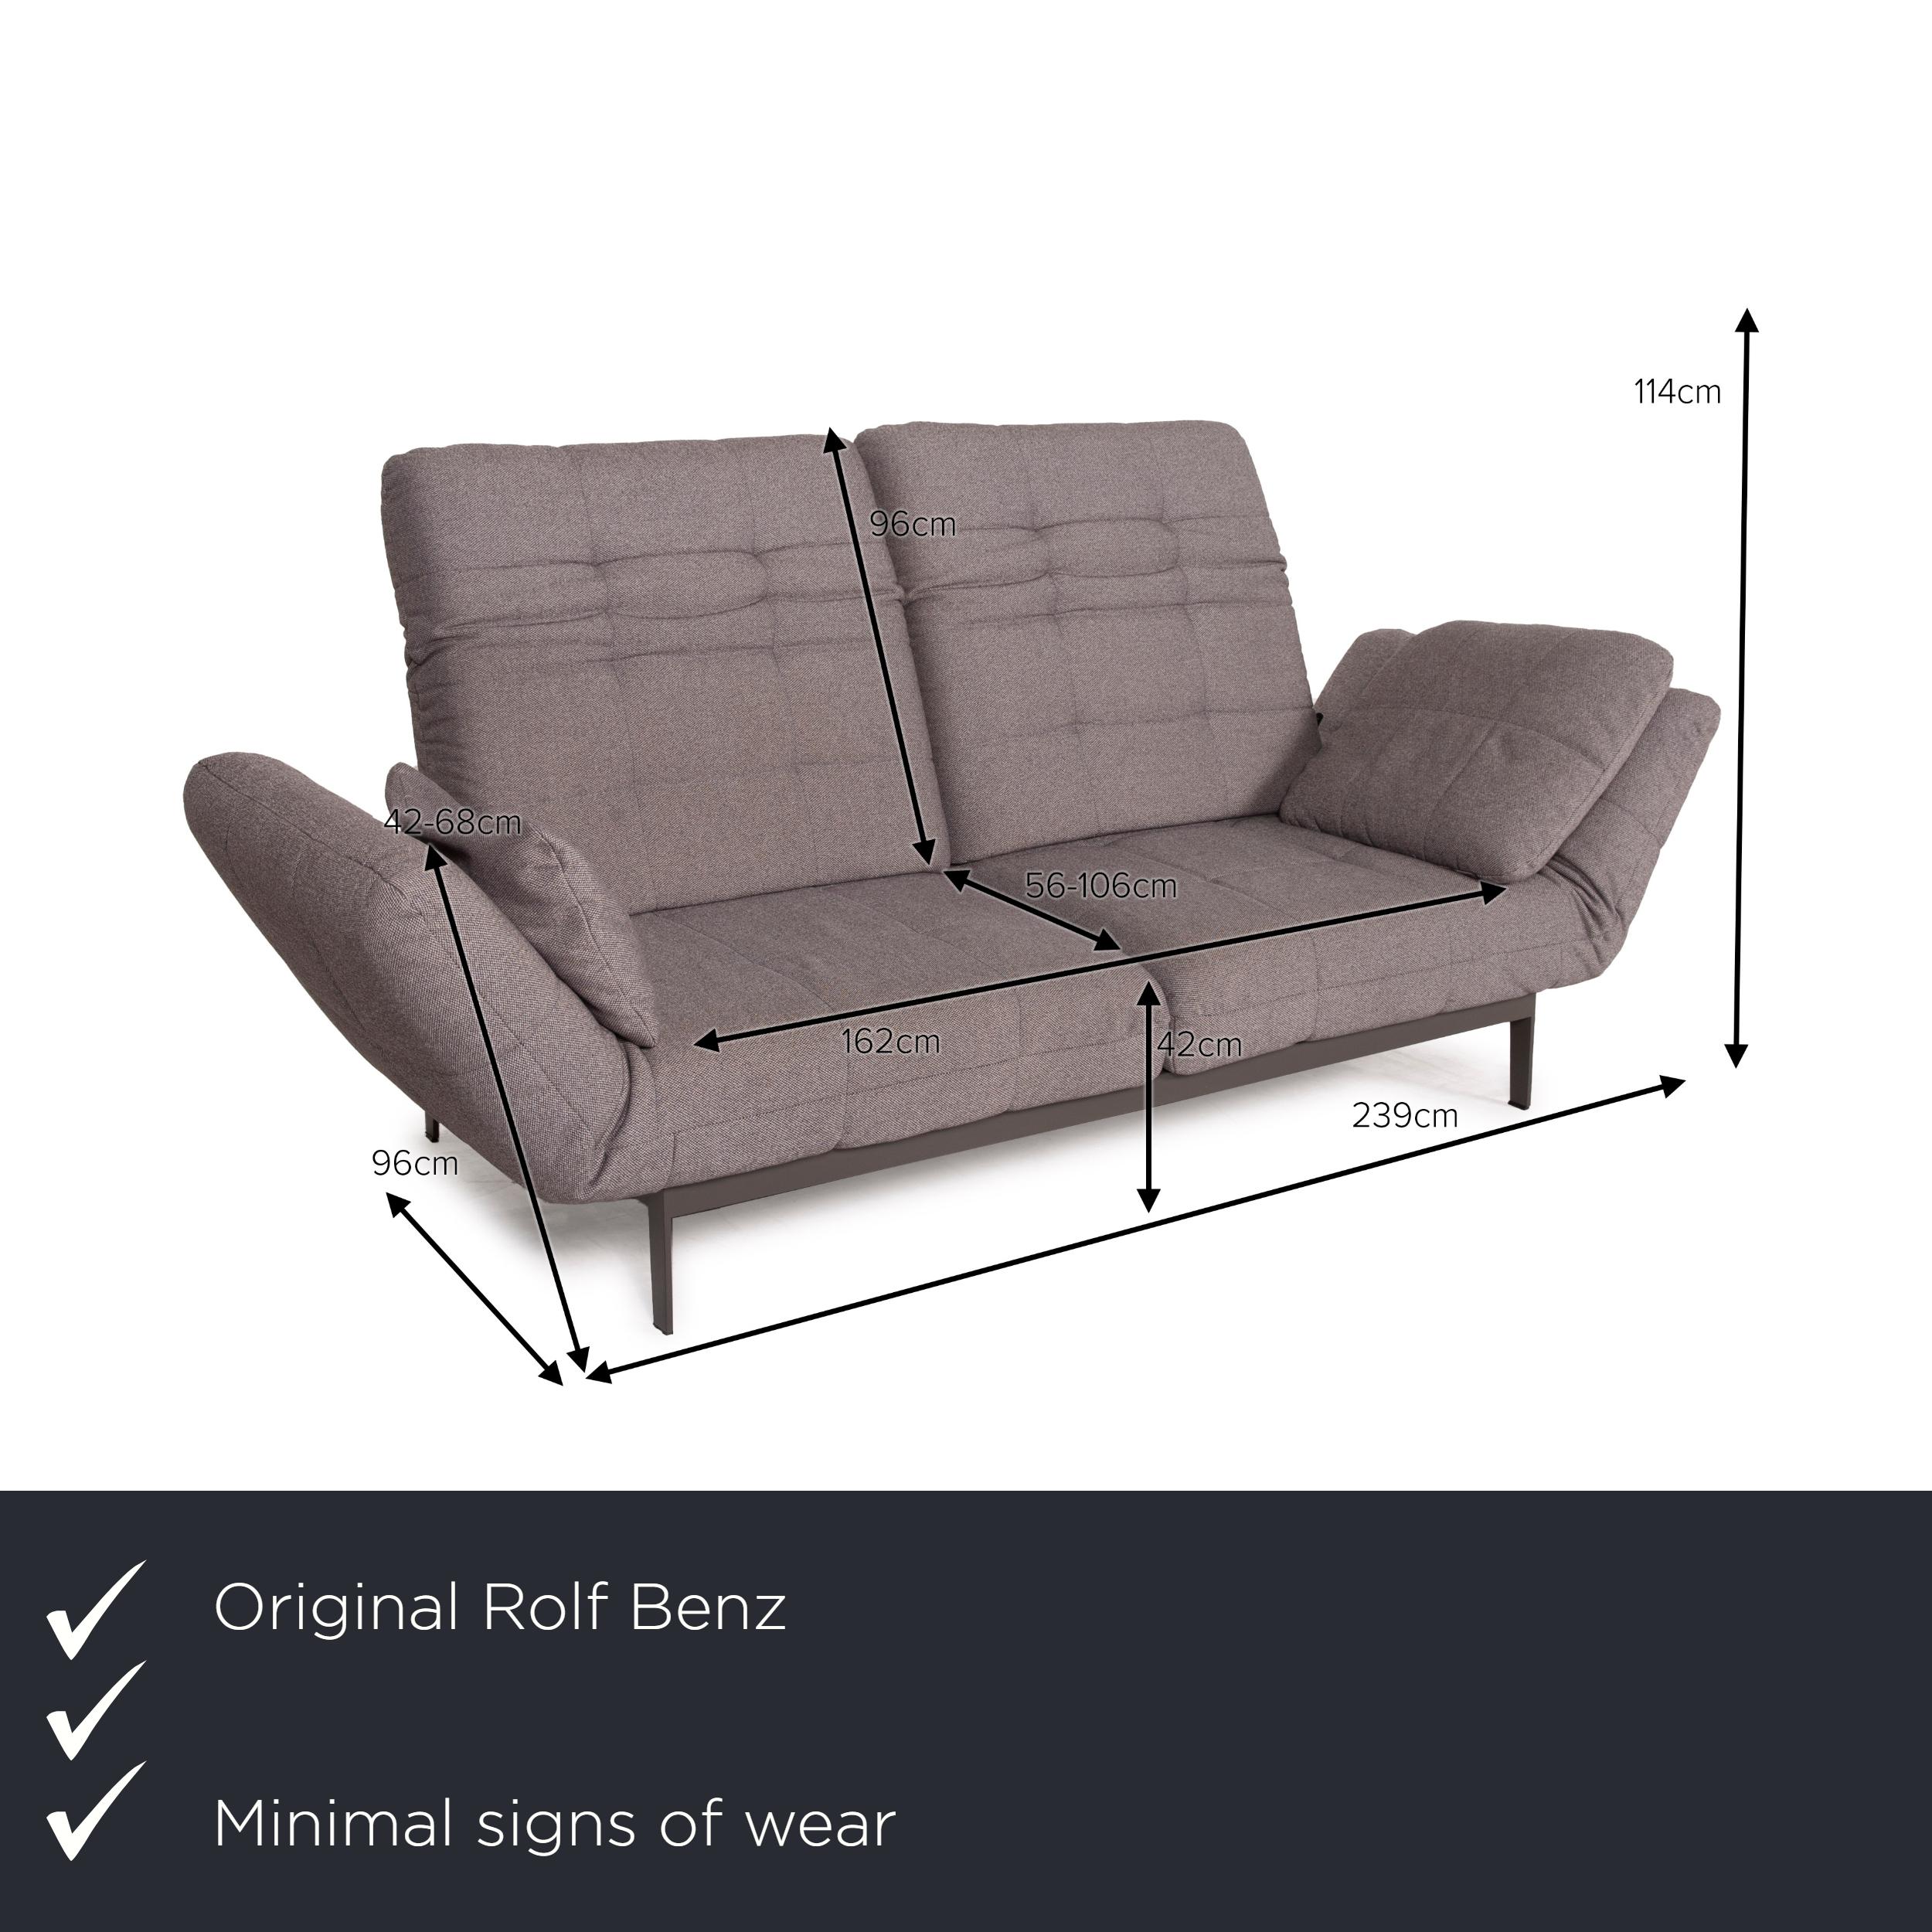 We present to you a Rolf Benz Mera fabric sofa two-seater sofa fabric gray function.


 Product measurements in centimeters:
 

Depth: 96
Width: 239
Height: 114
Seat height: 42
Rest height: 42
Seat depth: 56
Seat width: 162
Back height: